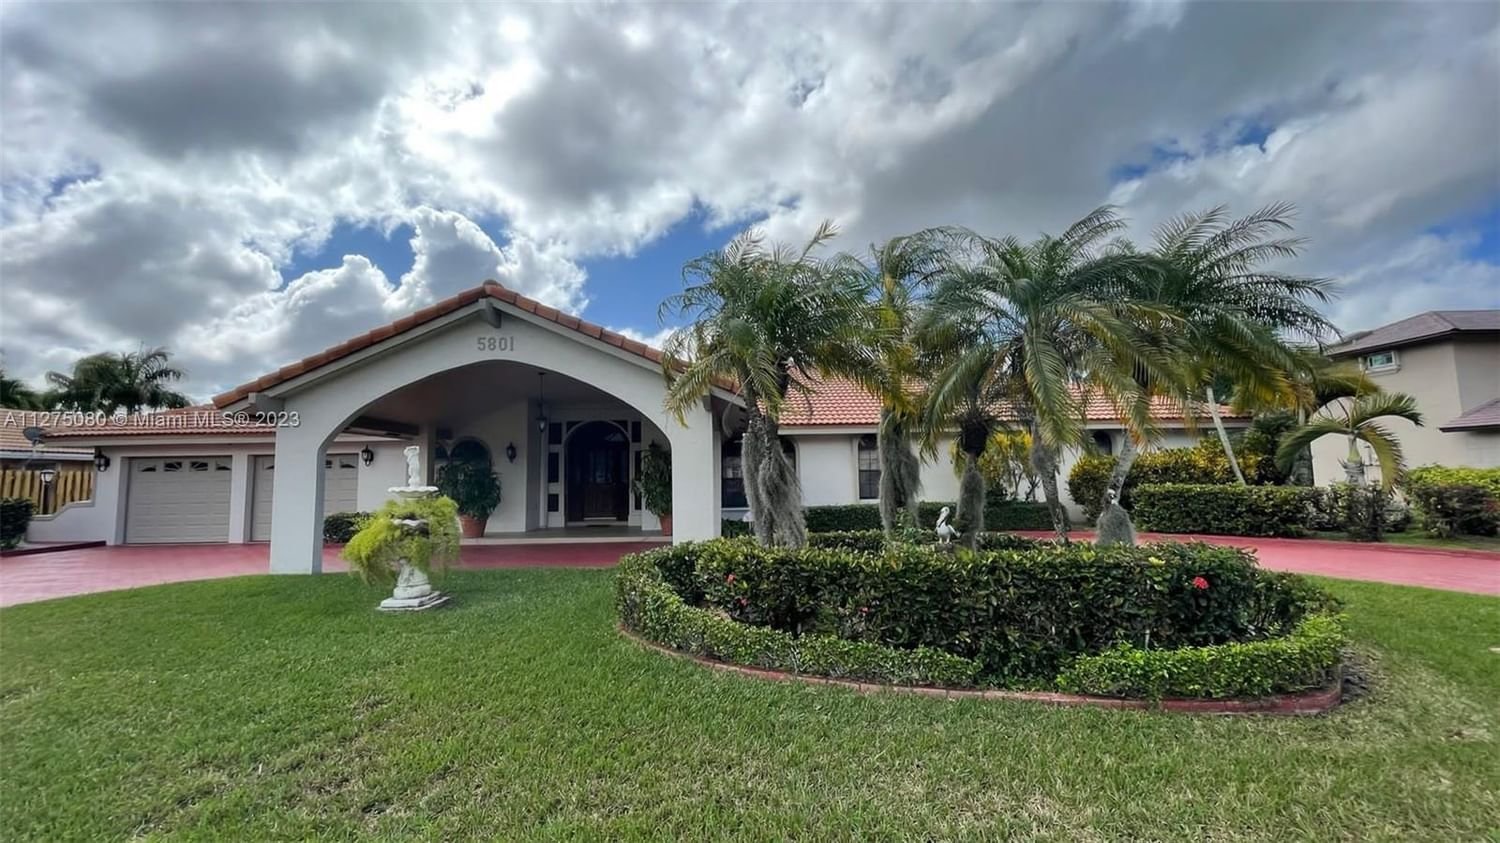 Real estate property located at 5801 Castlegate Ave, Broward County, Davie, FL